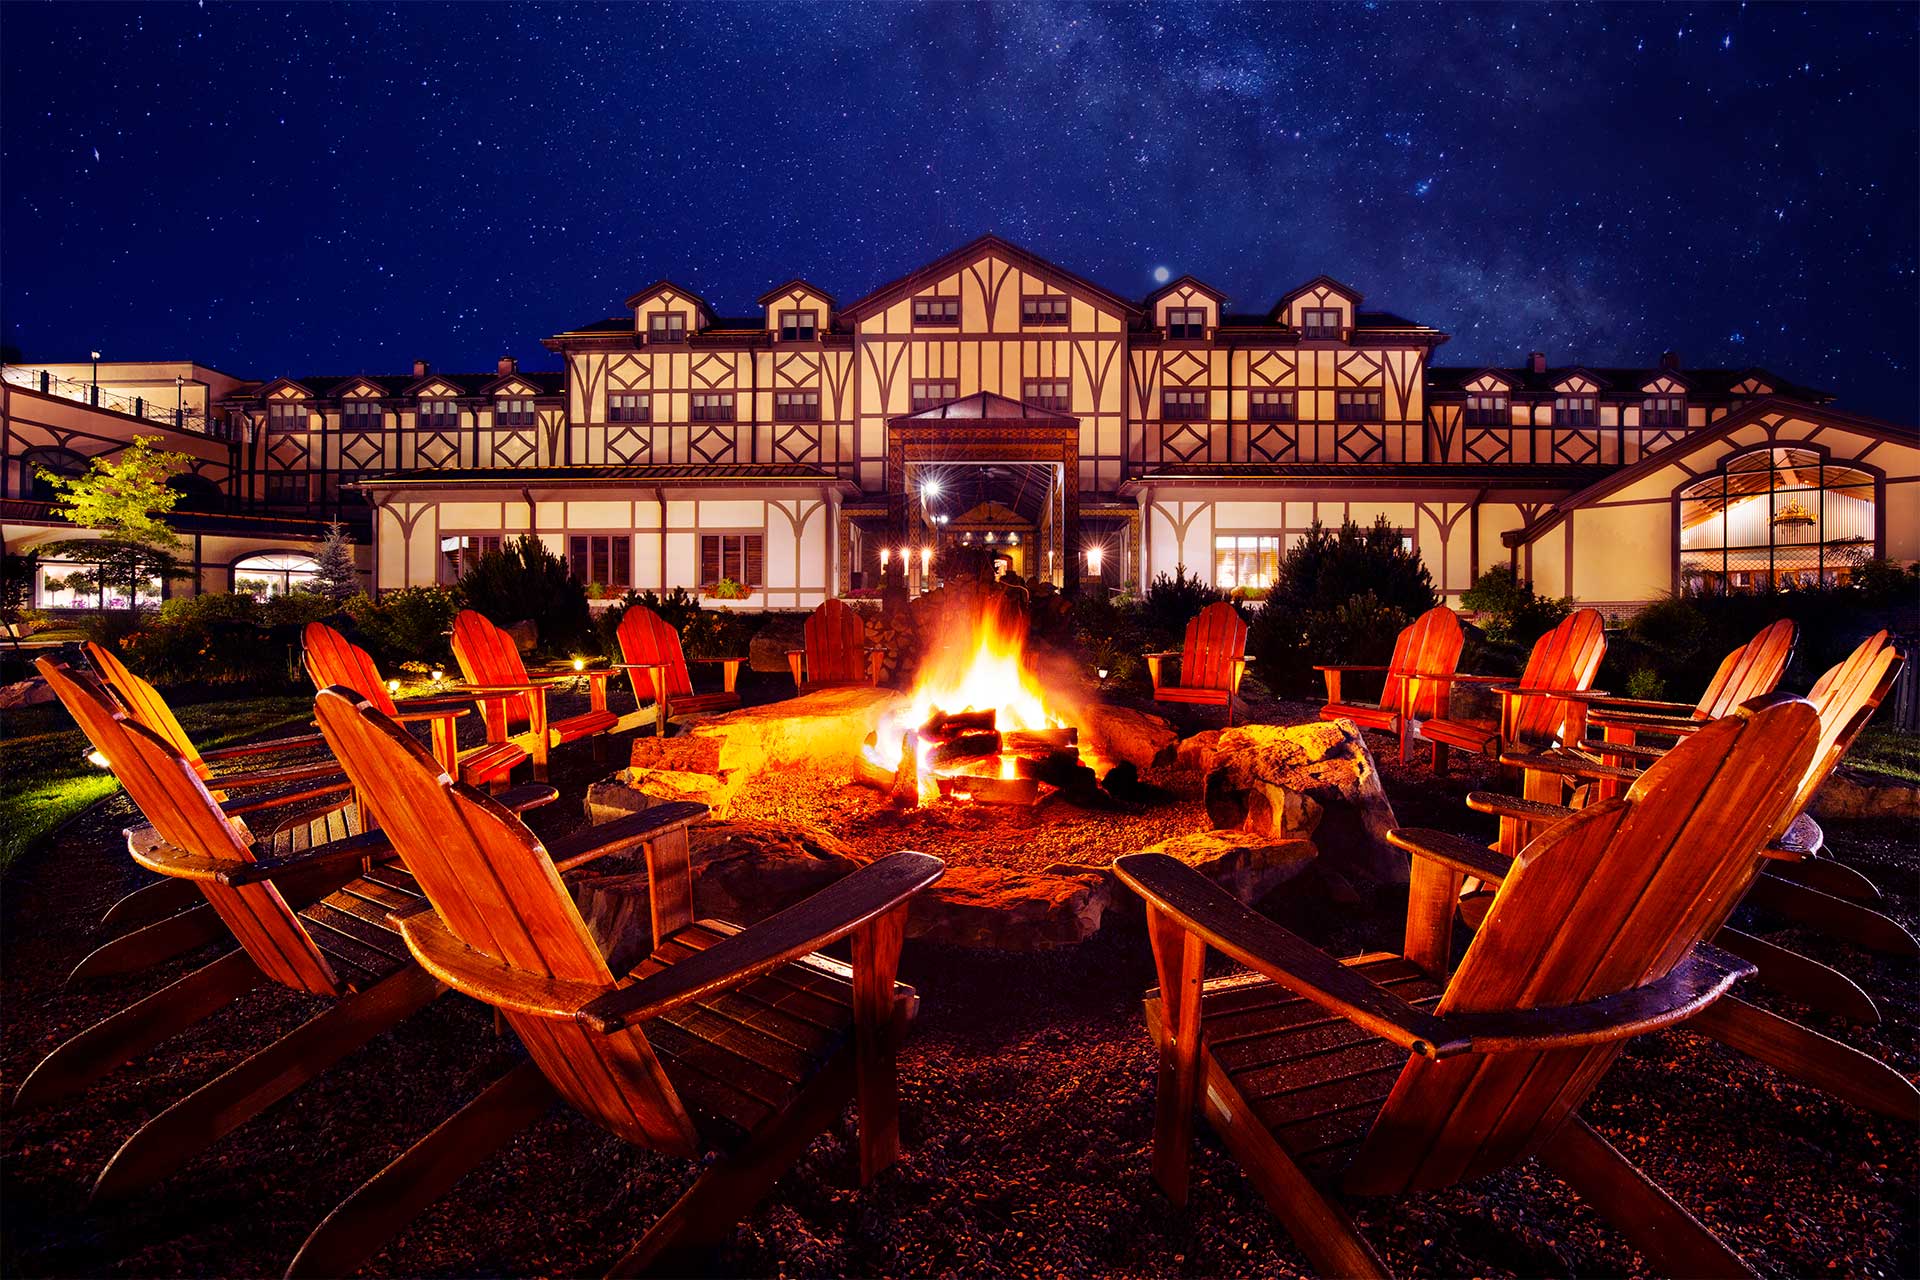 A large fire pit surrounded by chairs in front of a large lodge